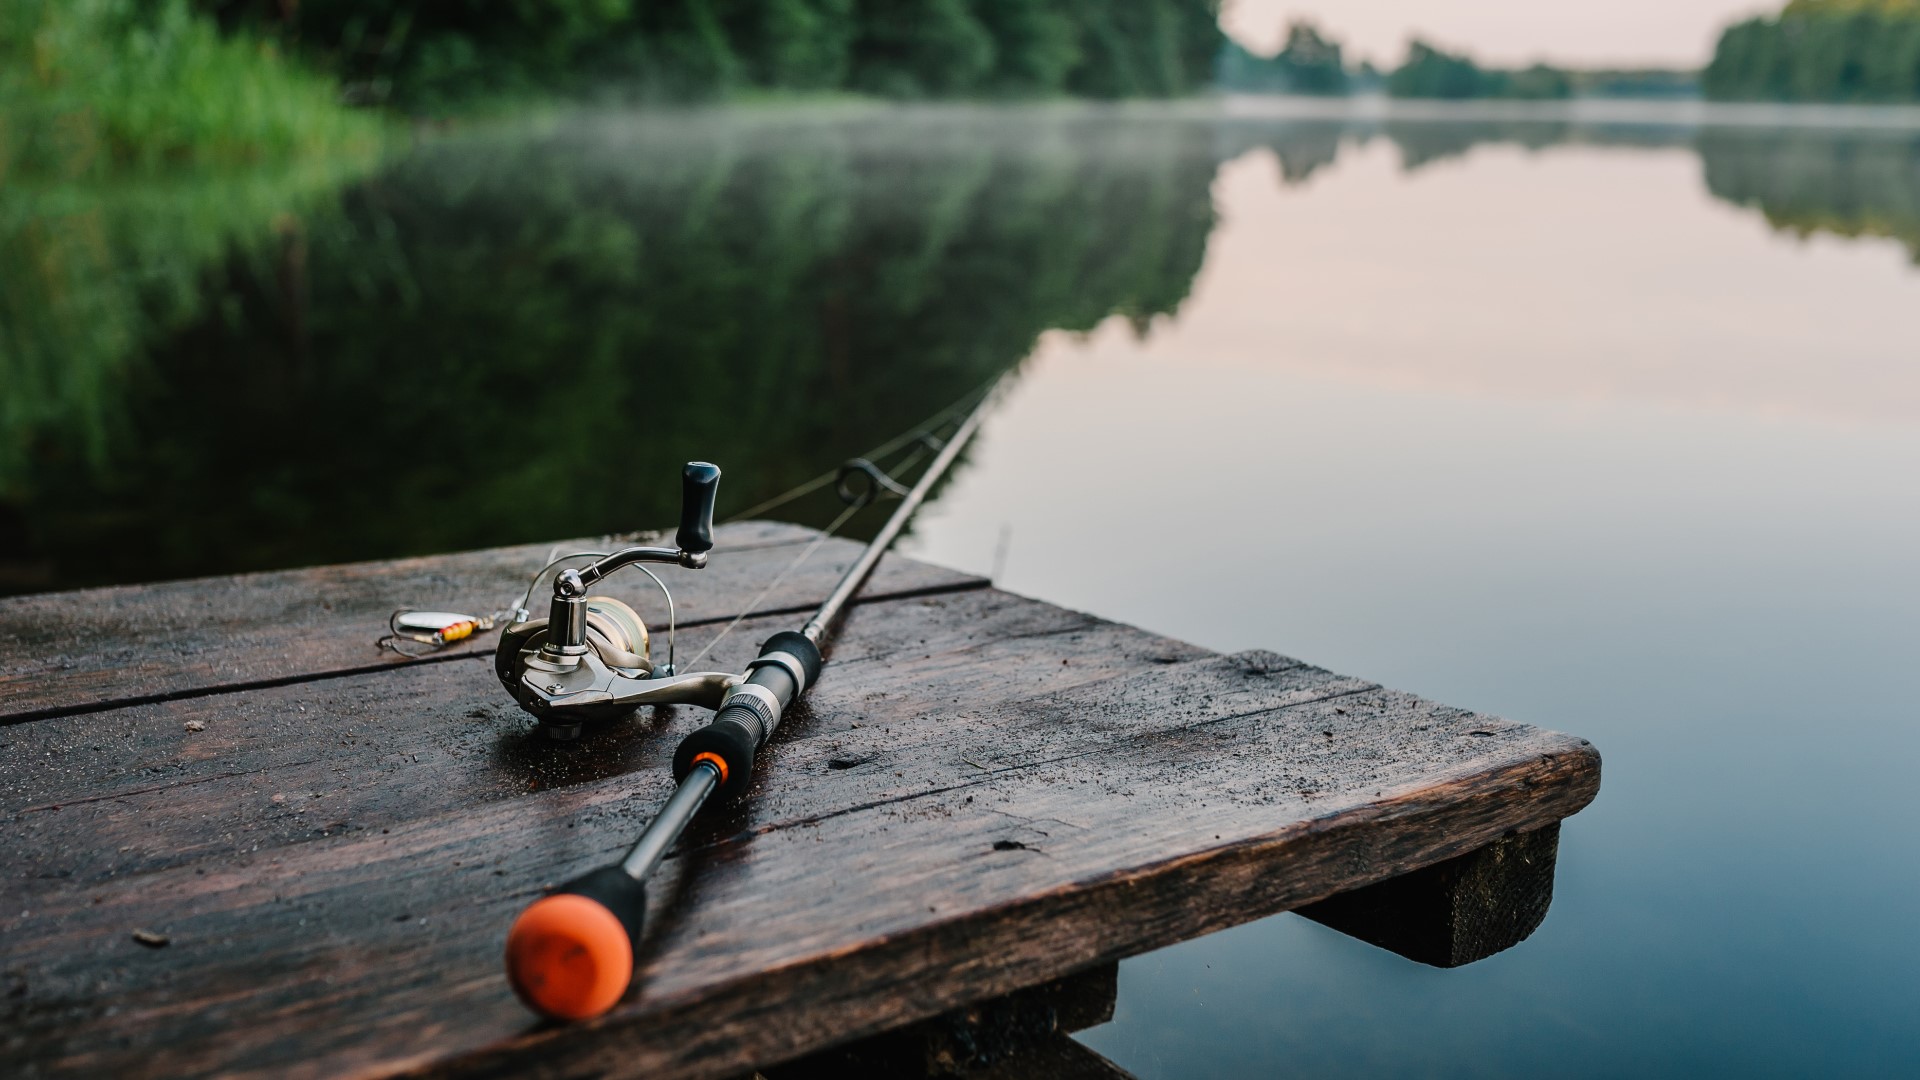 Indiana residents won't need a license to fish in the state's public waters on May 2, June 5-6 and Sept. 25.